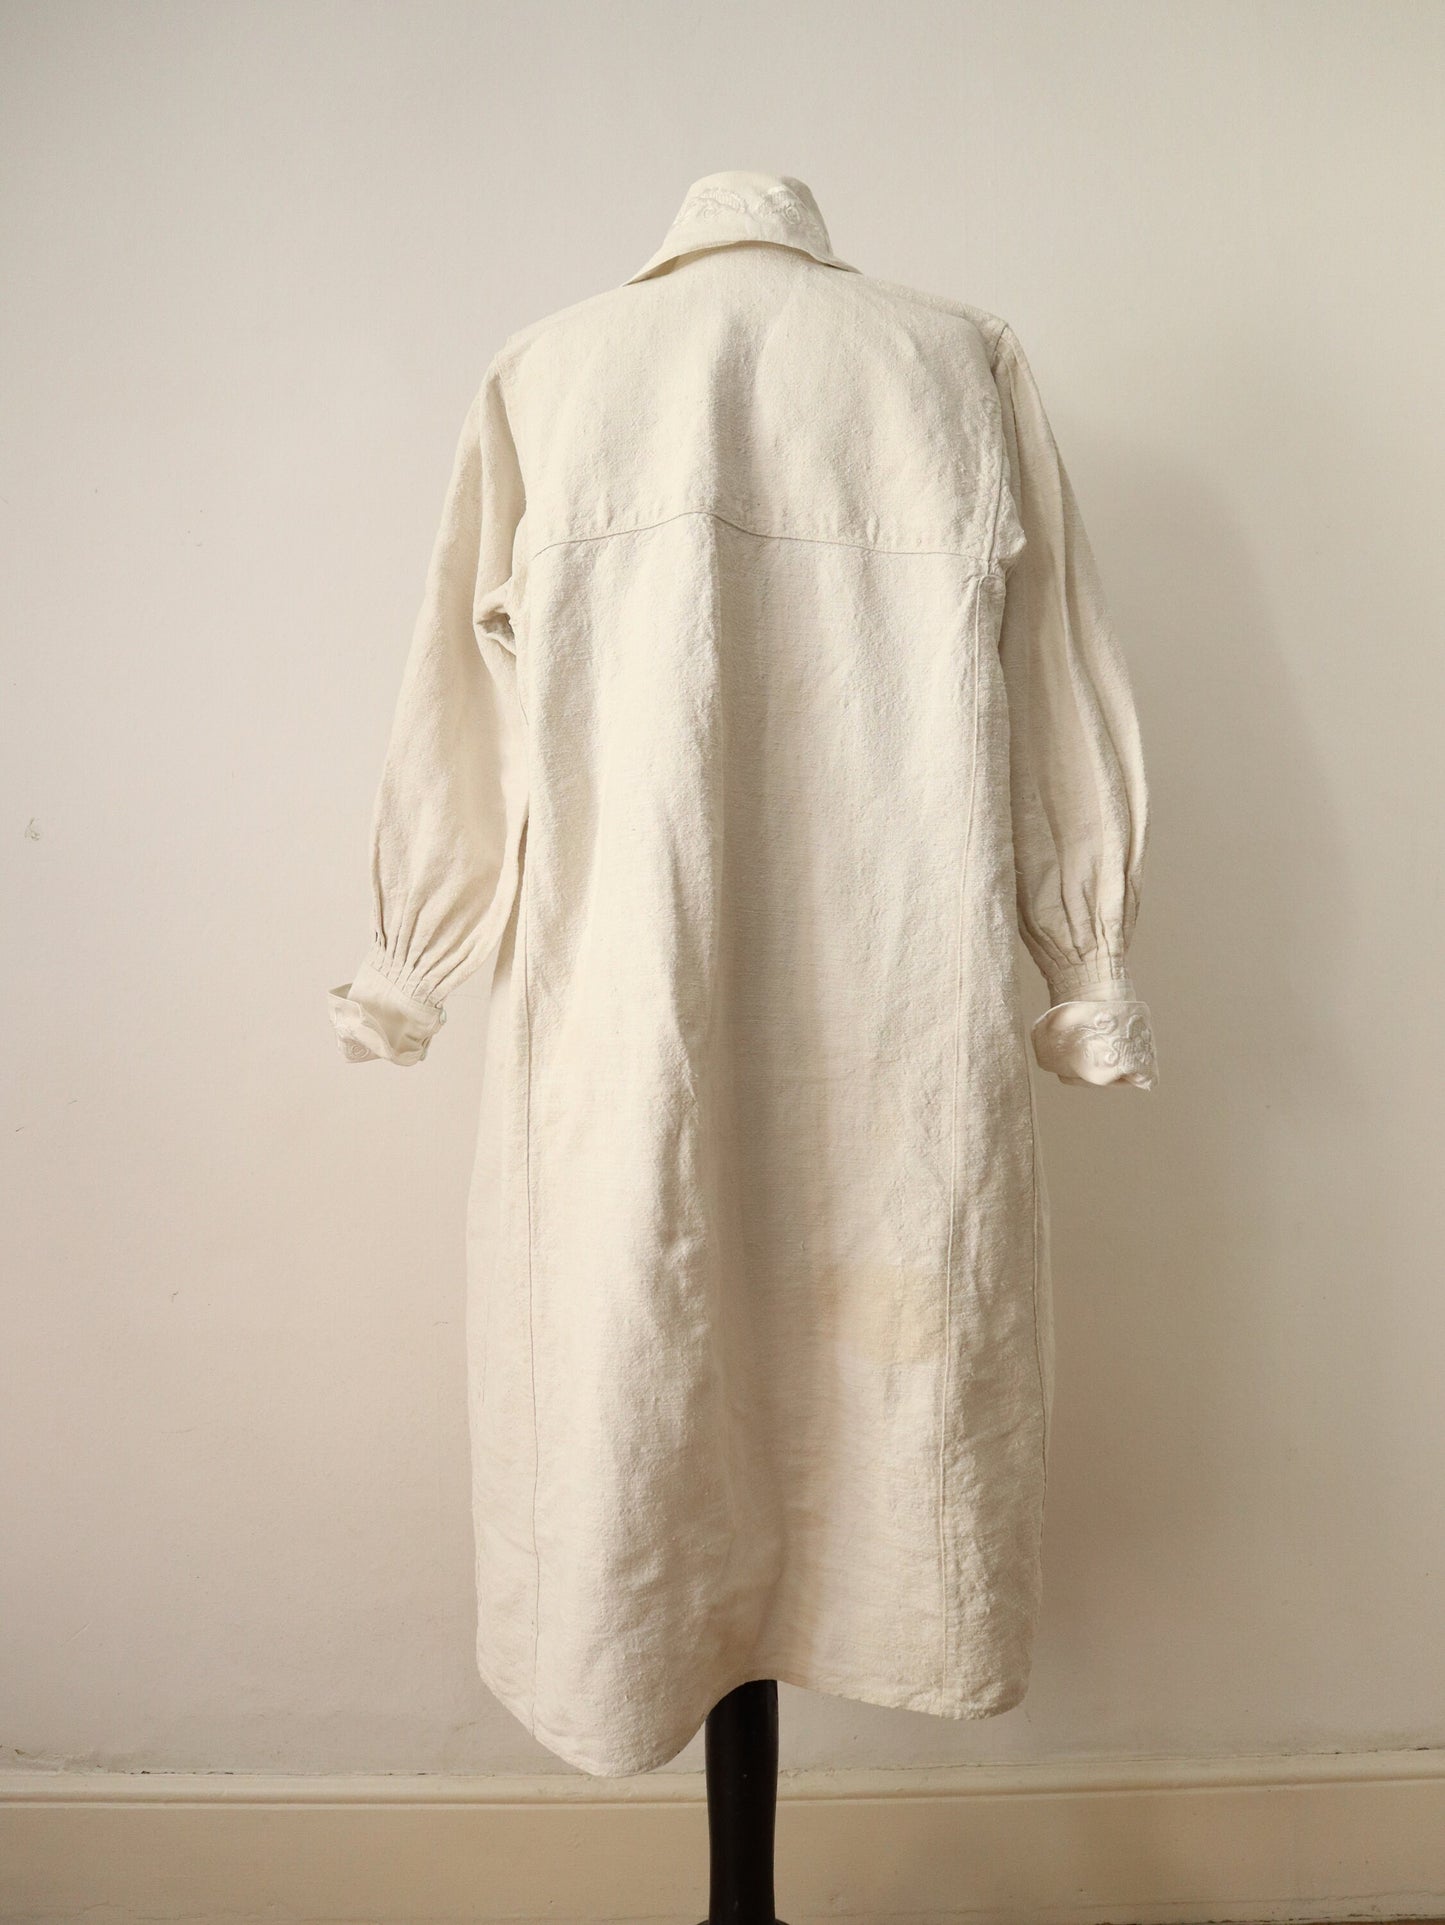 1930s Romanian Linen Folk Smock Shirt Dress Embroidered Traditional Clothing